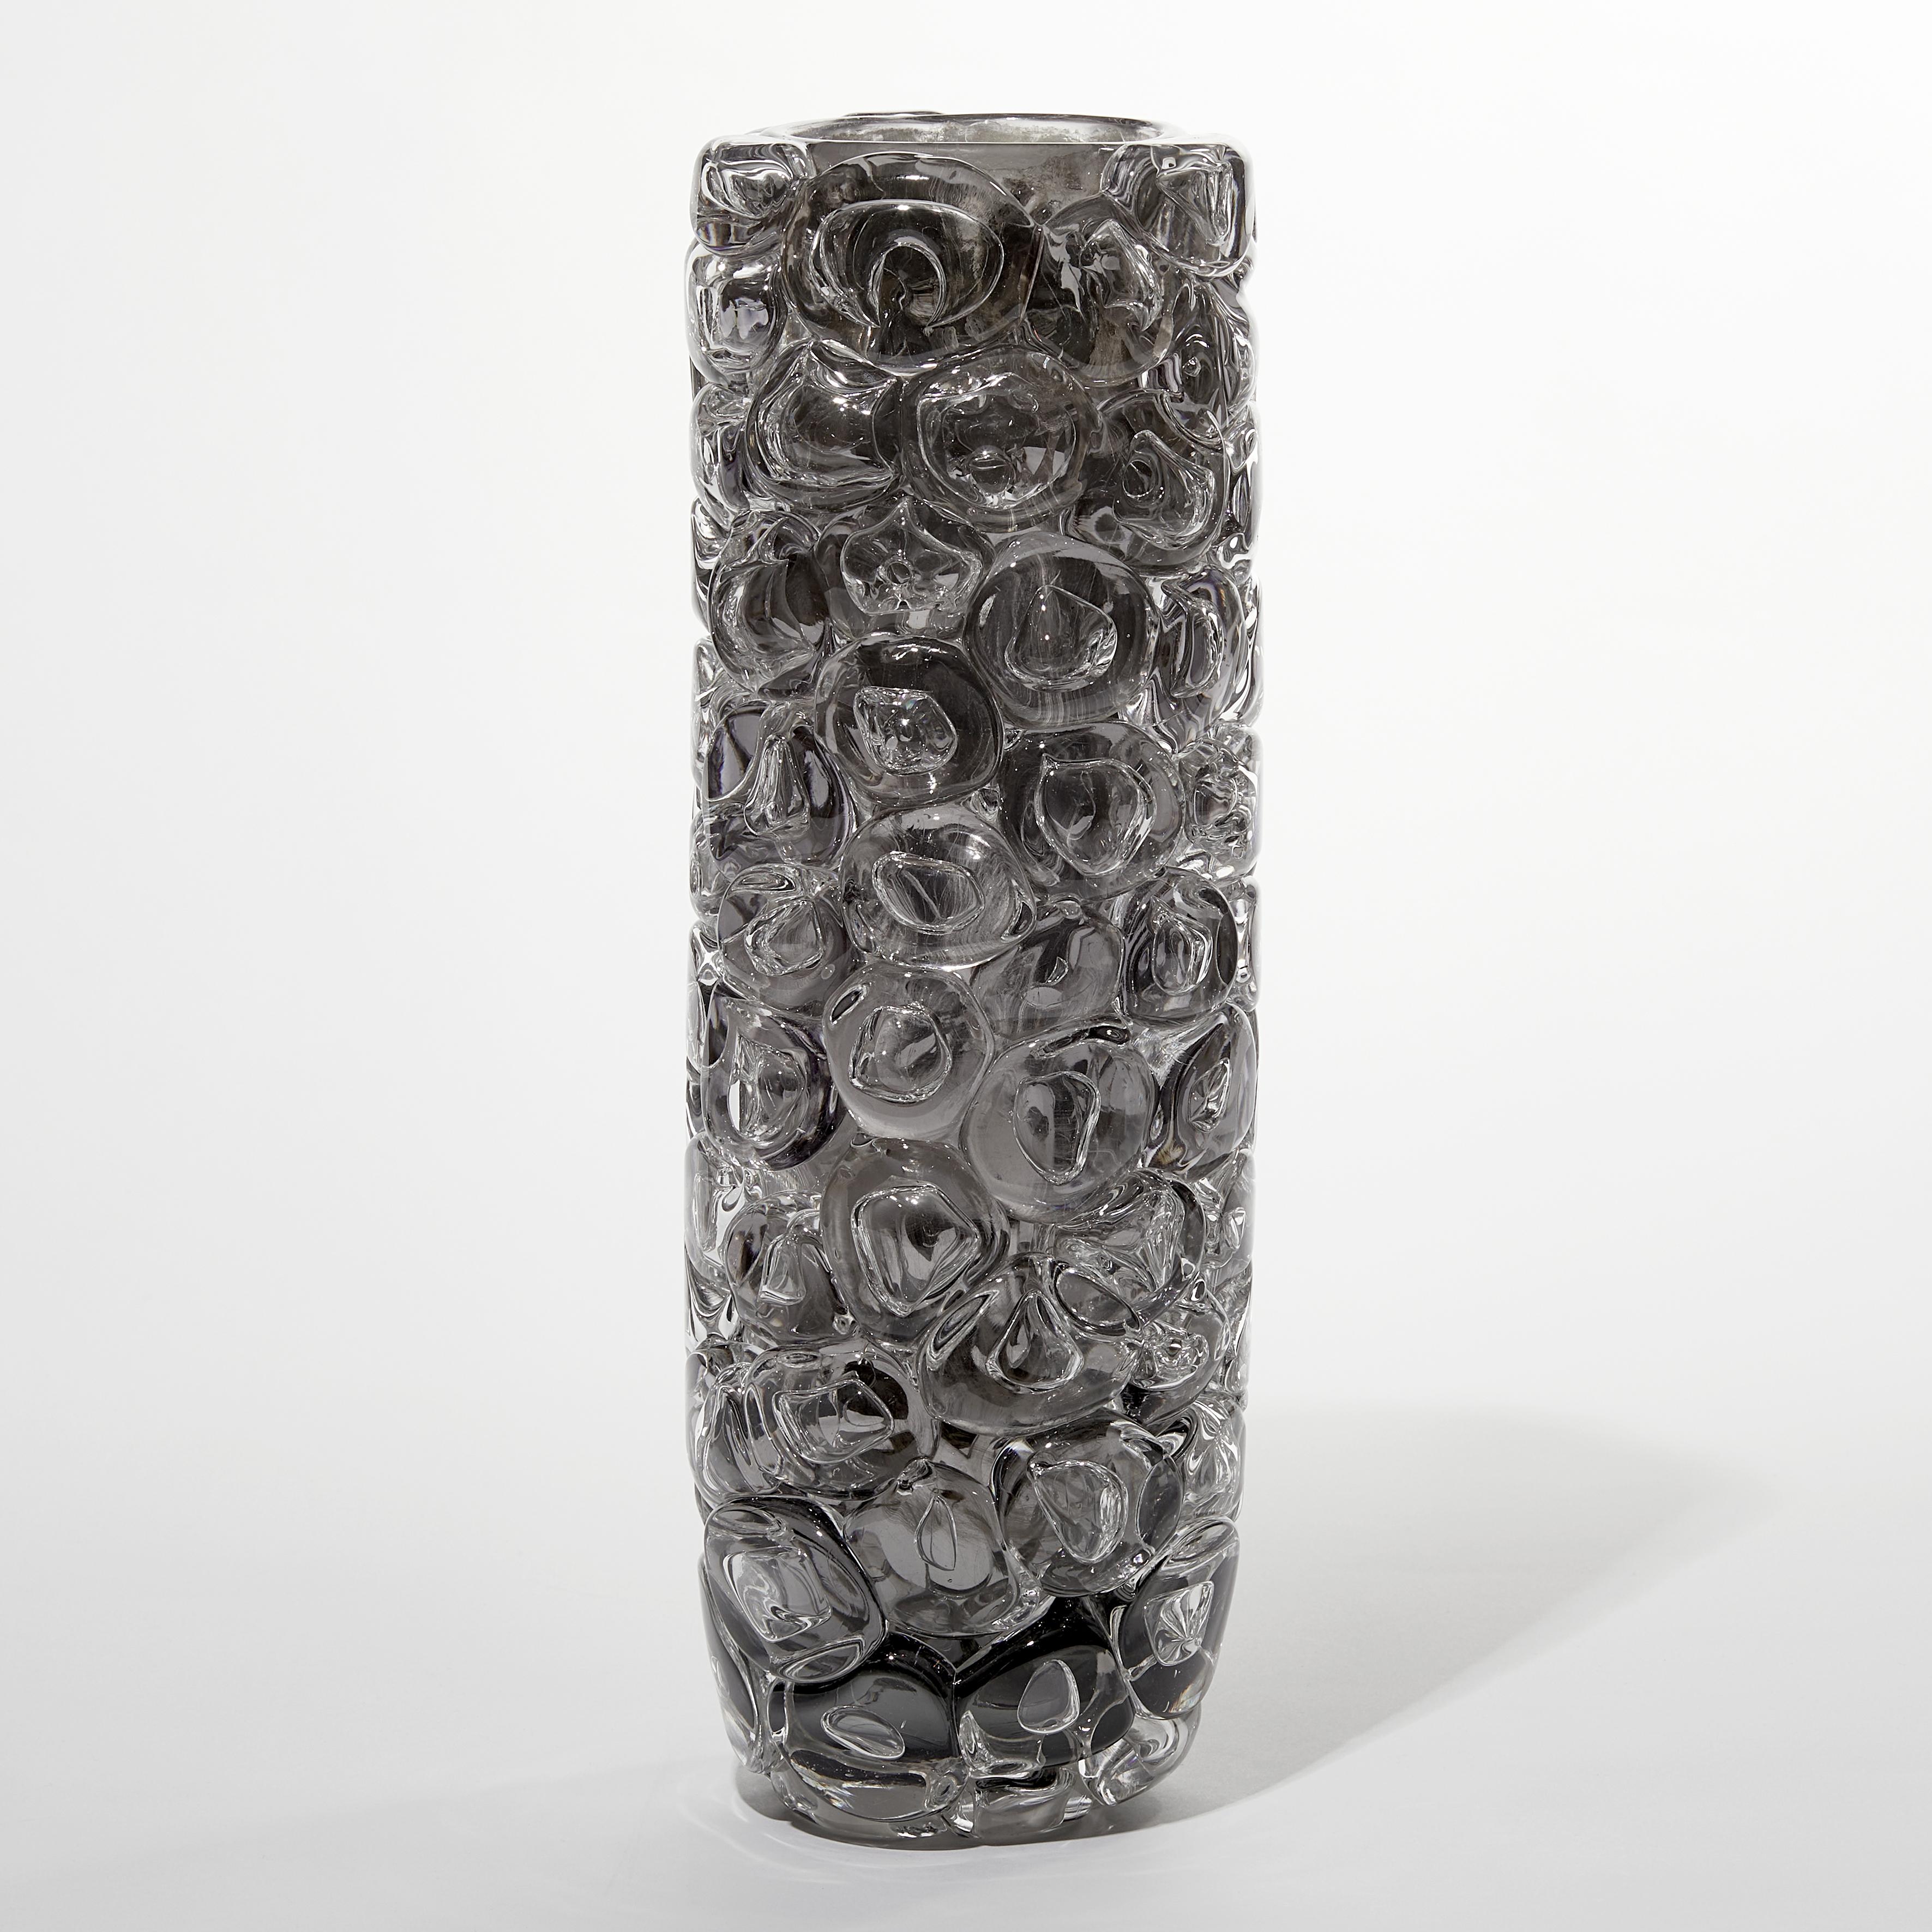 Bubblewrap in Monochrome II, a Silver and Clear Glass Vase by Allister Malcolm 2